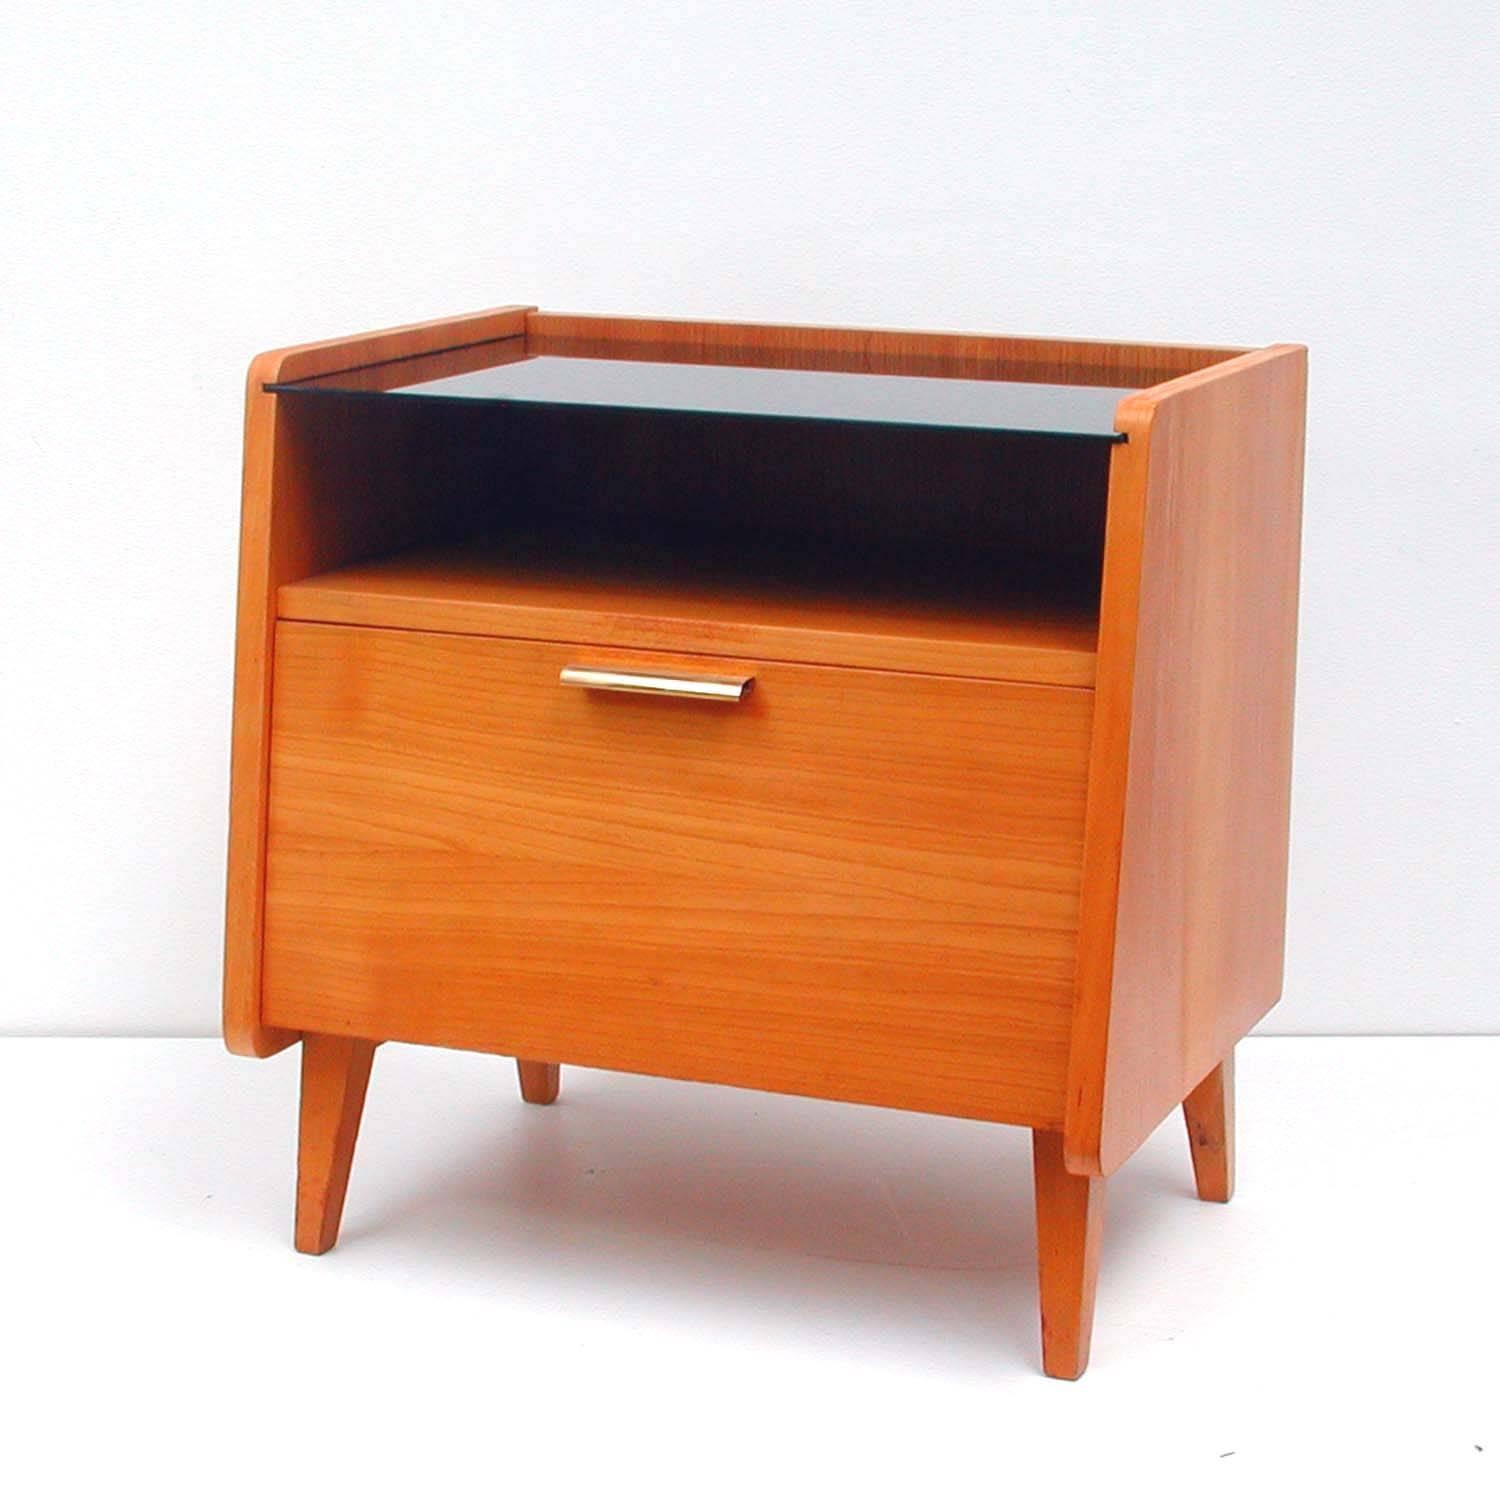 This vintage midcentury chest or commode was manufactured in Germany, during the Scandinavian modern period. It is made of teak and has got a black glass top.